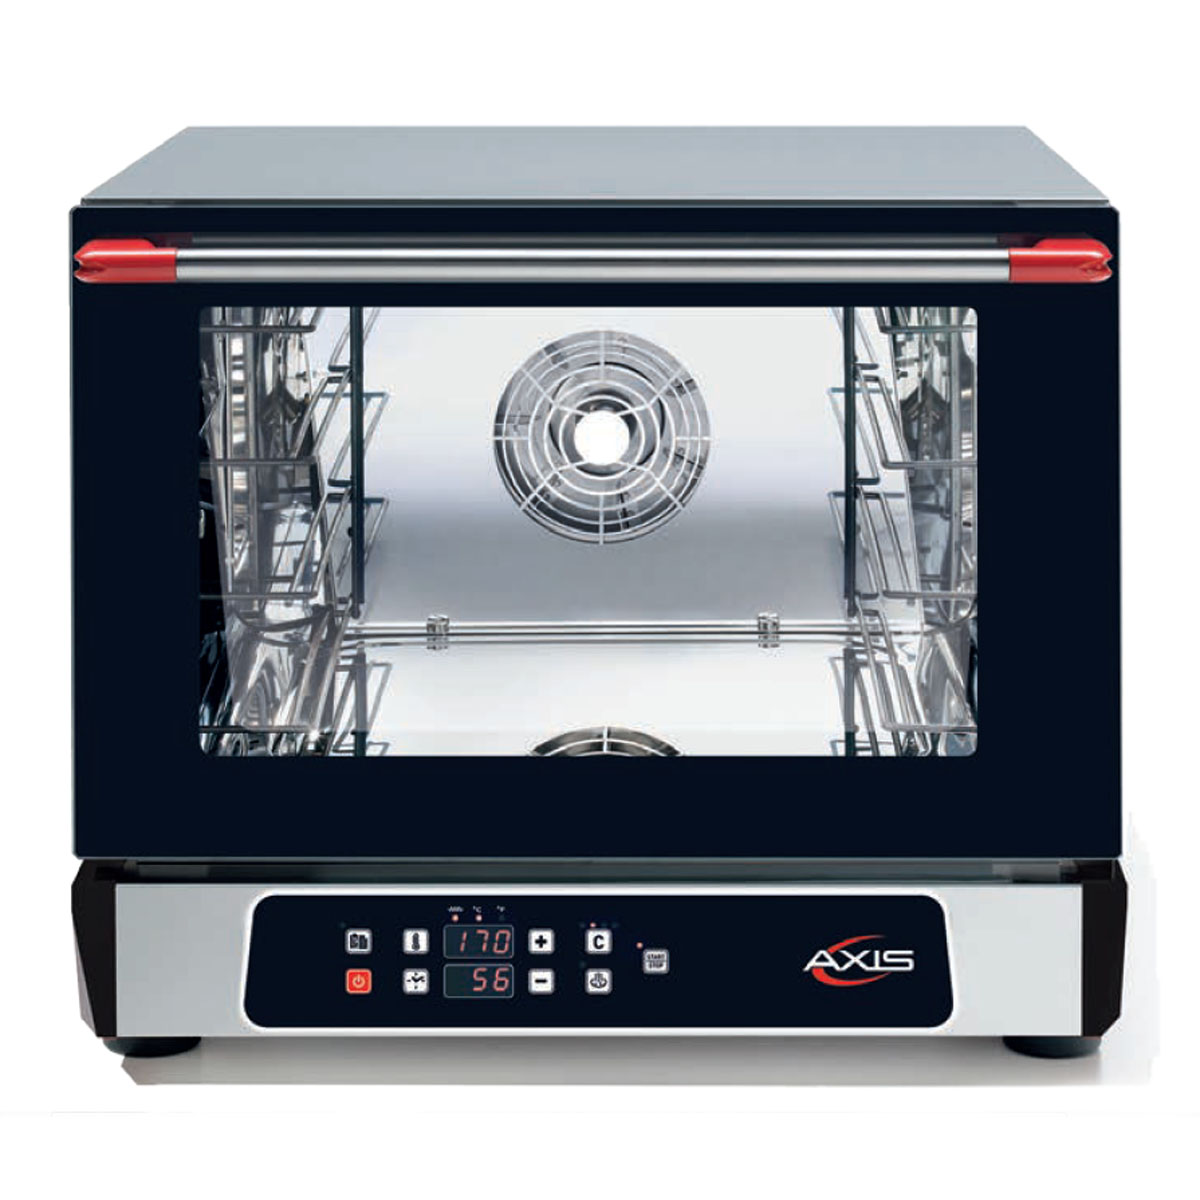 Axis AX-513RHD Half-Size Countertop Electric Convection Oven With Humidity, Digital Control - Reversing Fan - 3 Shelves